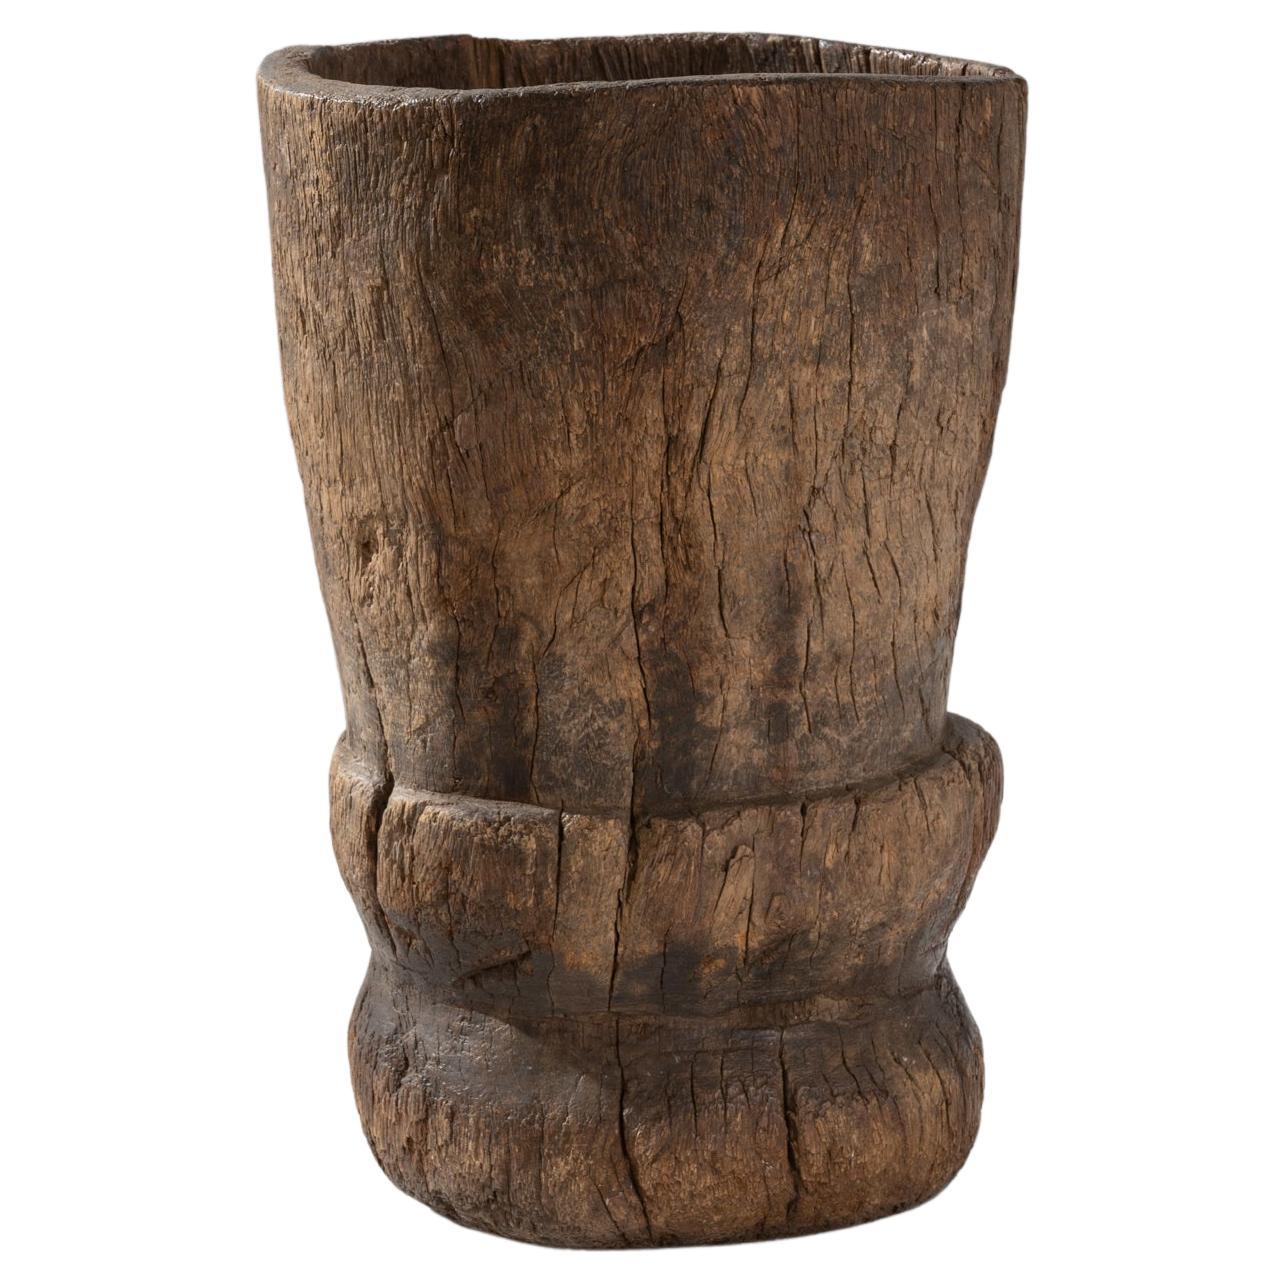 19th Century African Wooden Mortar